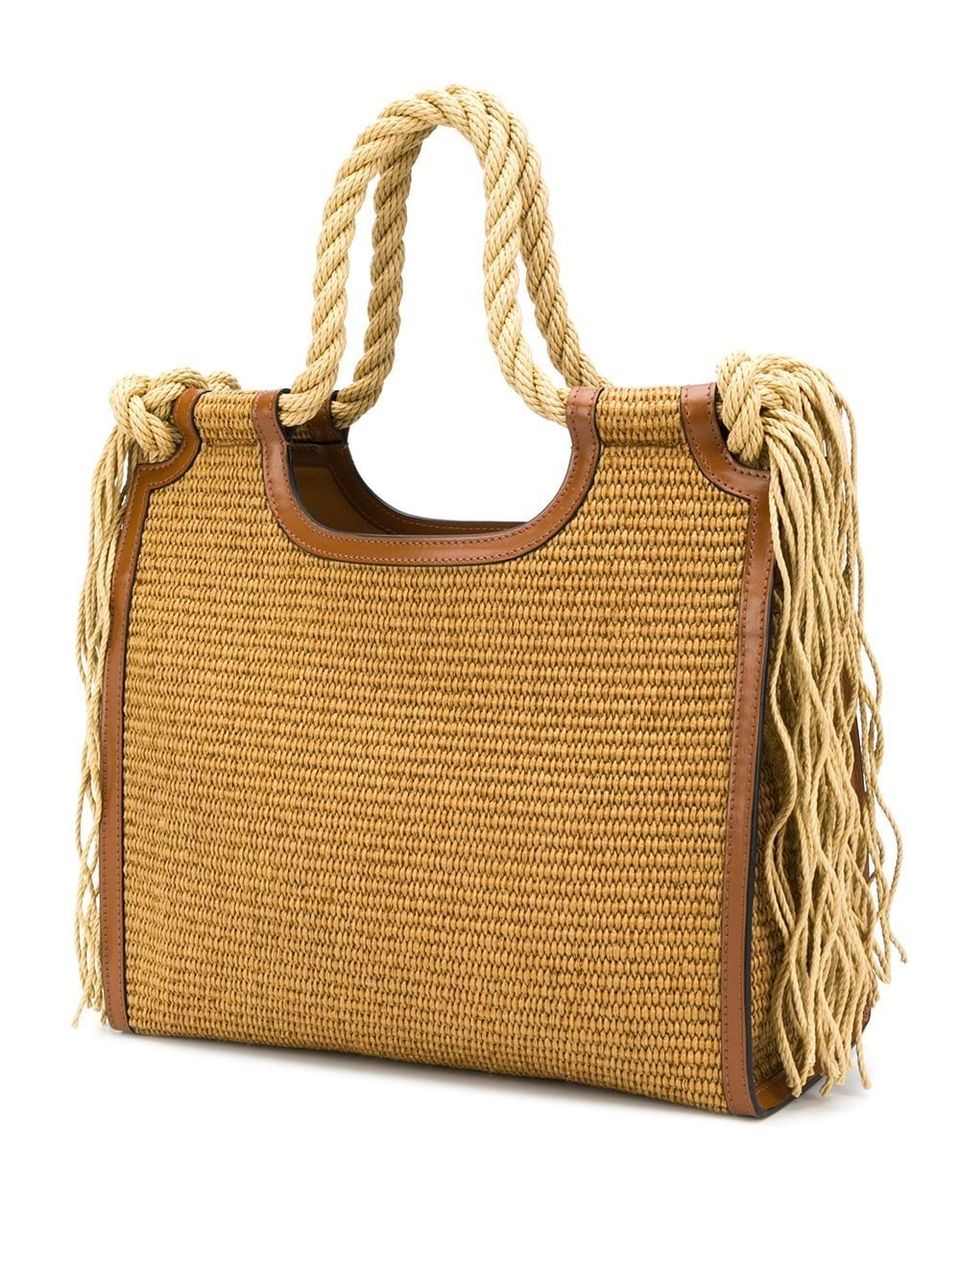 Marcel Summer bag with rope handles